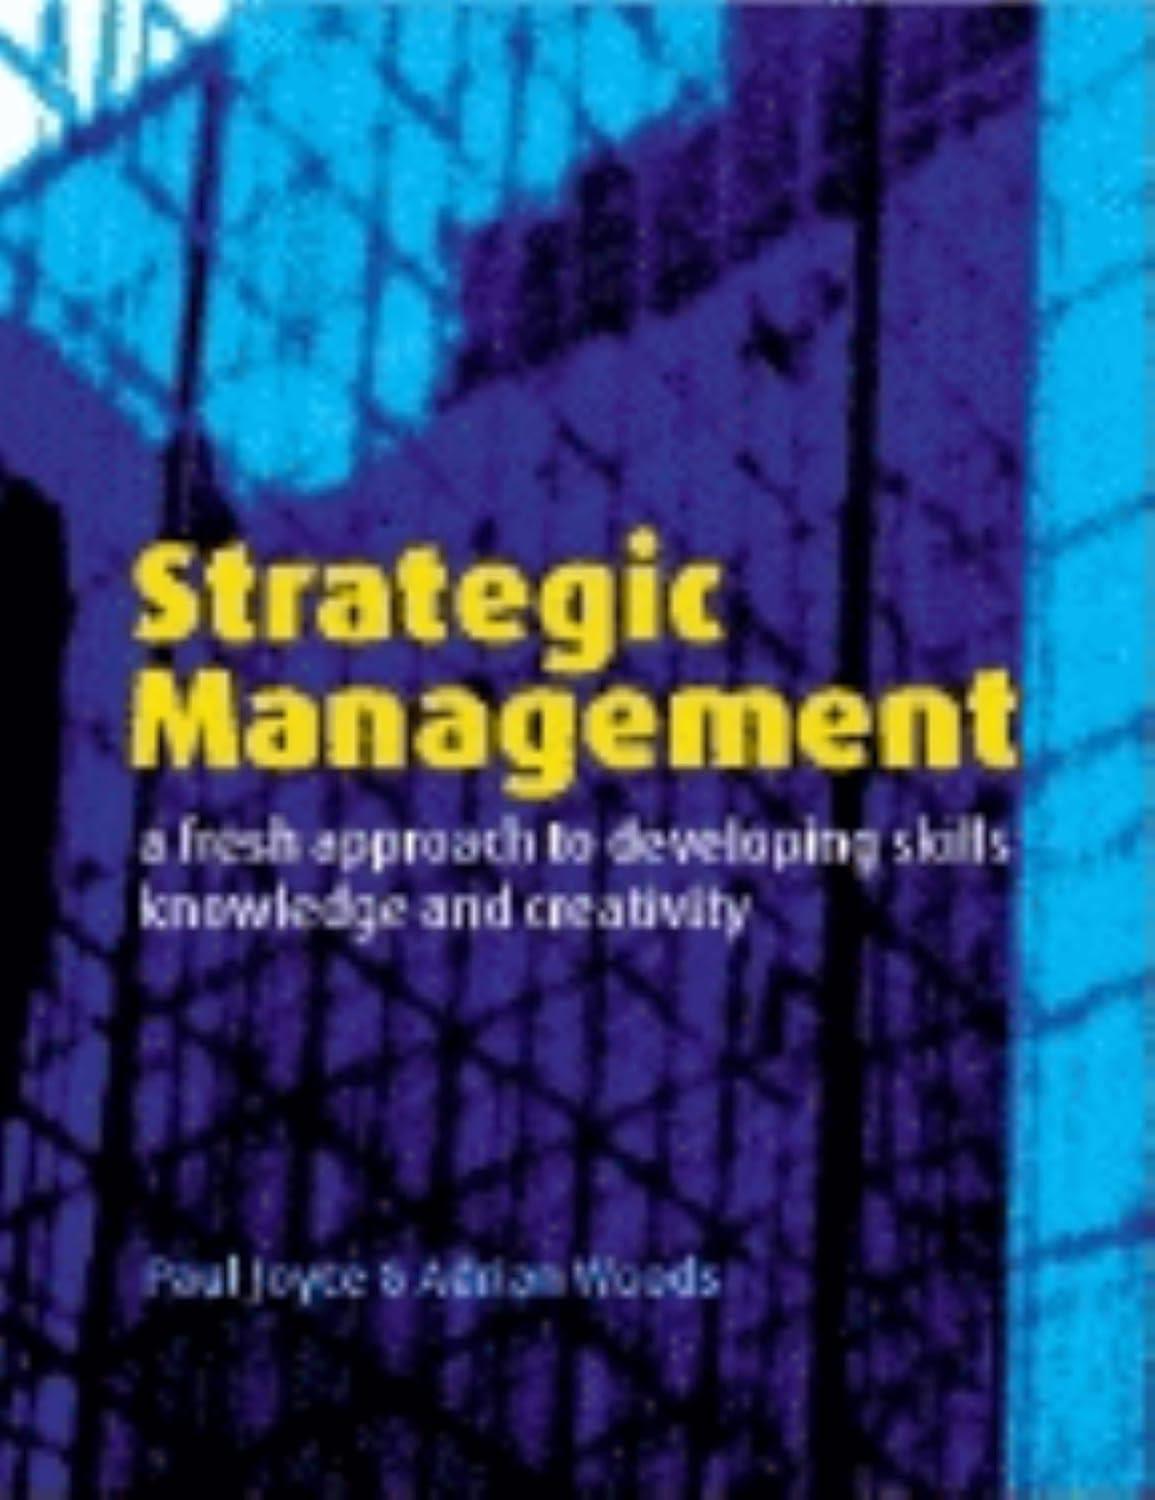 strategic management a fresh approach to developing skill  knowledge and creativity 1st edition paul joyce ,